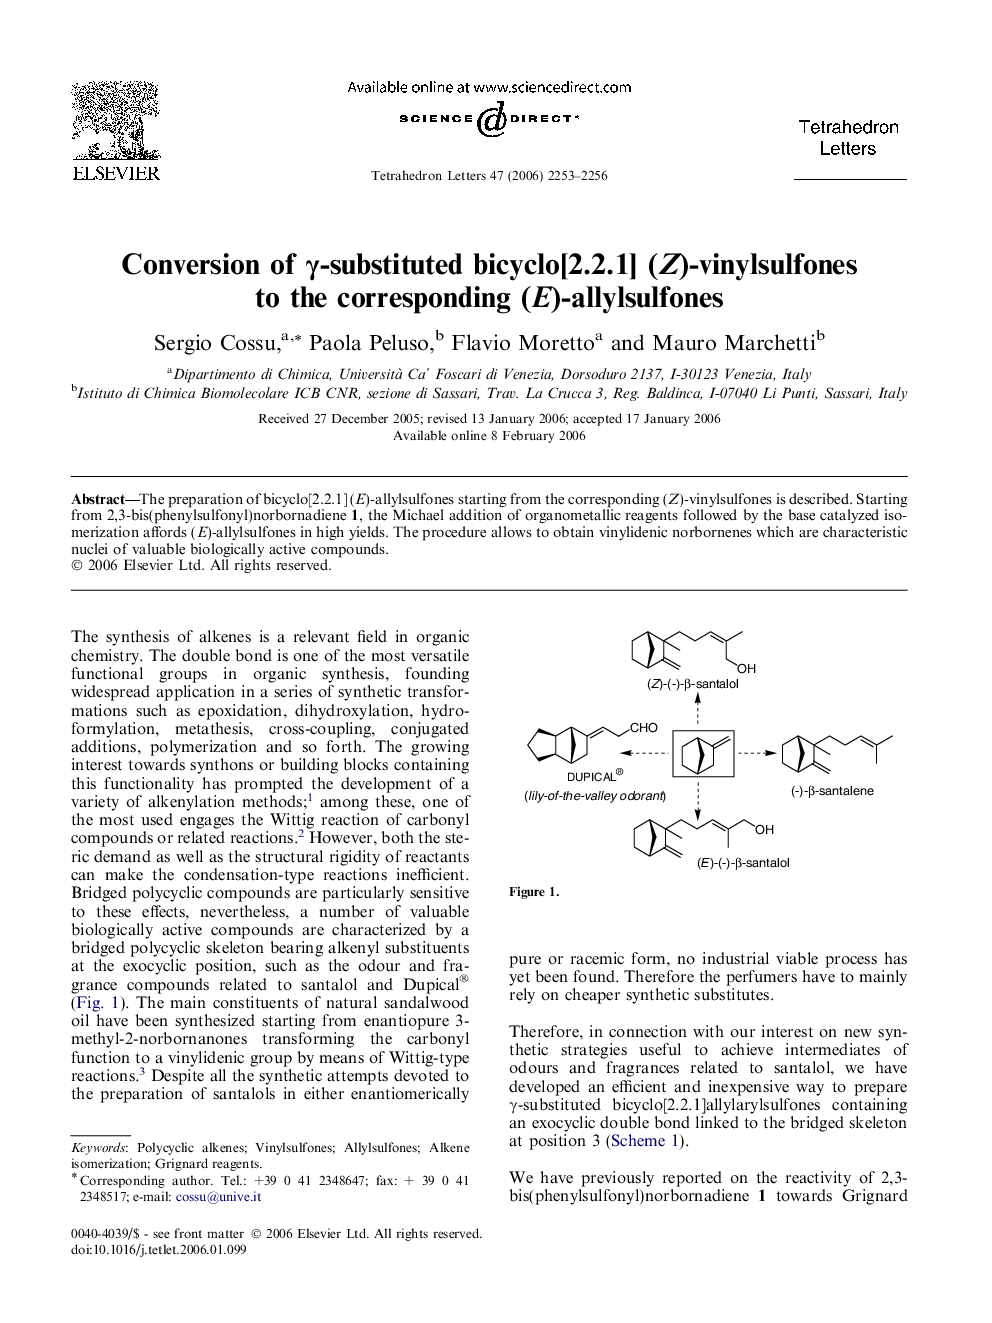 Conversion of Î³-substituted bicyclo[2.2.1] (Z)-vinylsulfones to the corresponding (E)-allylsulfones